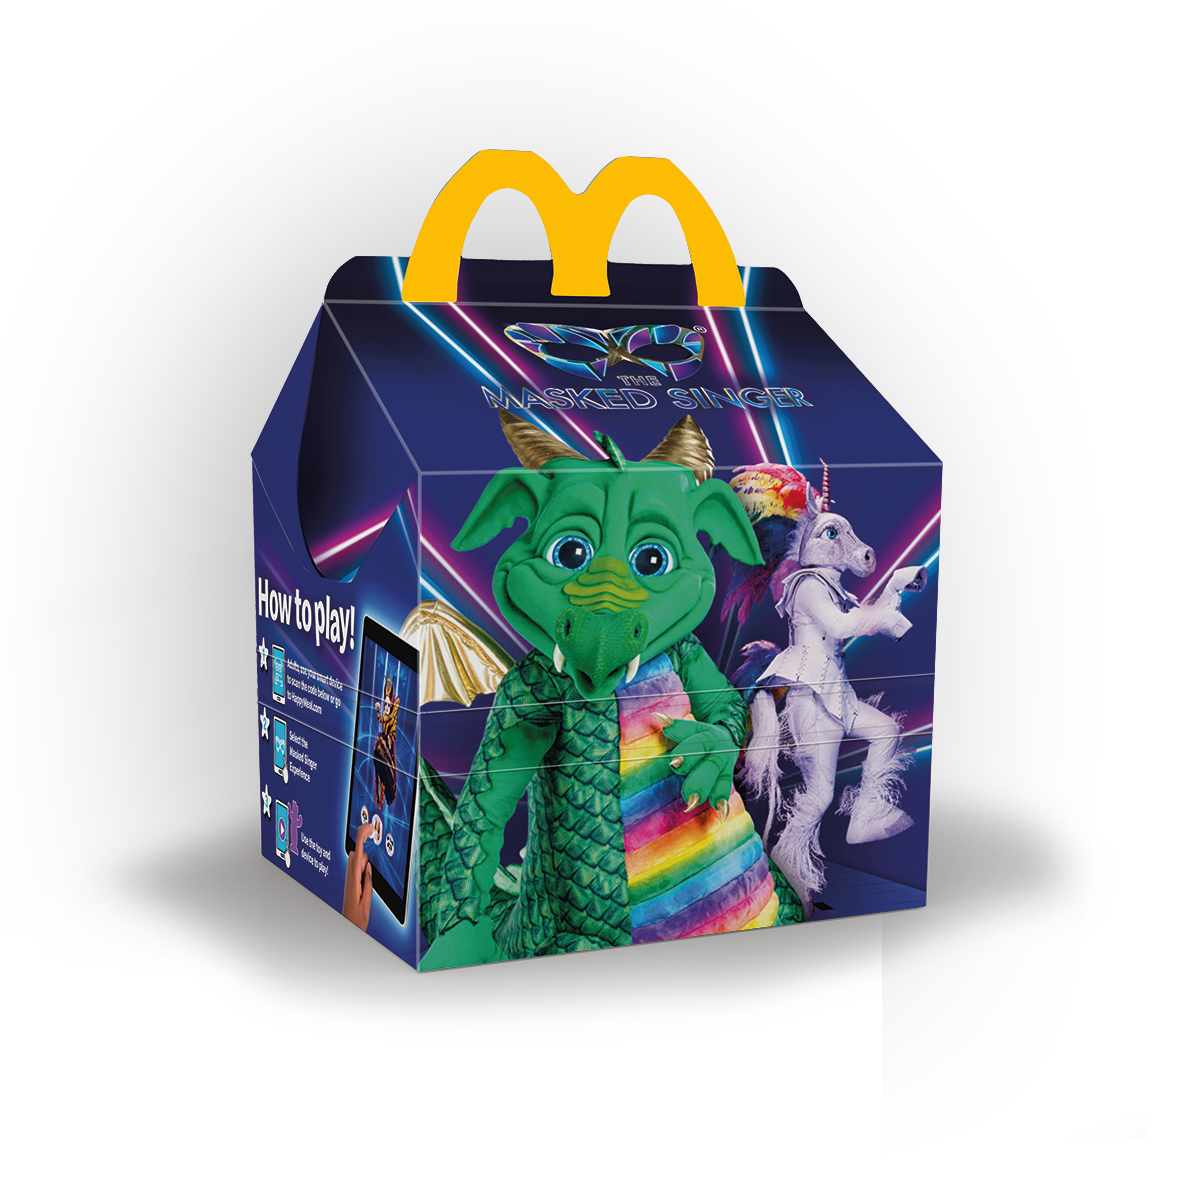 tms launches ‘Masknificent’ McDonald’s Happy Meal®